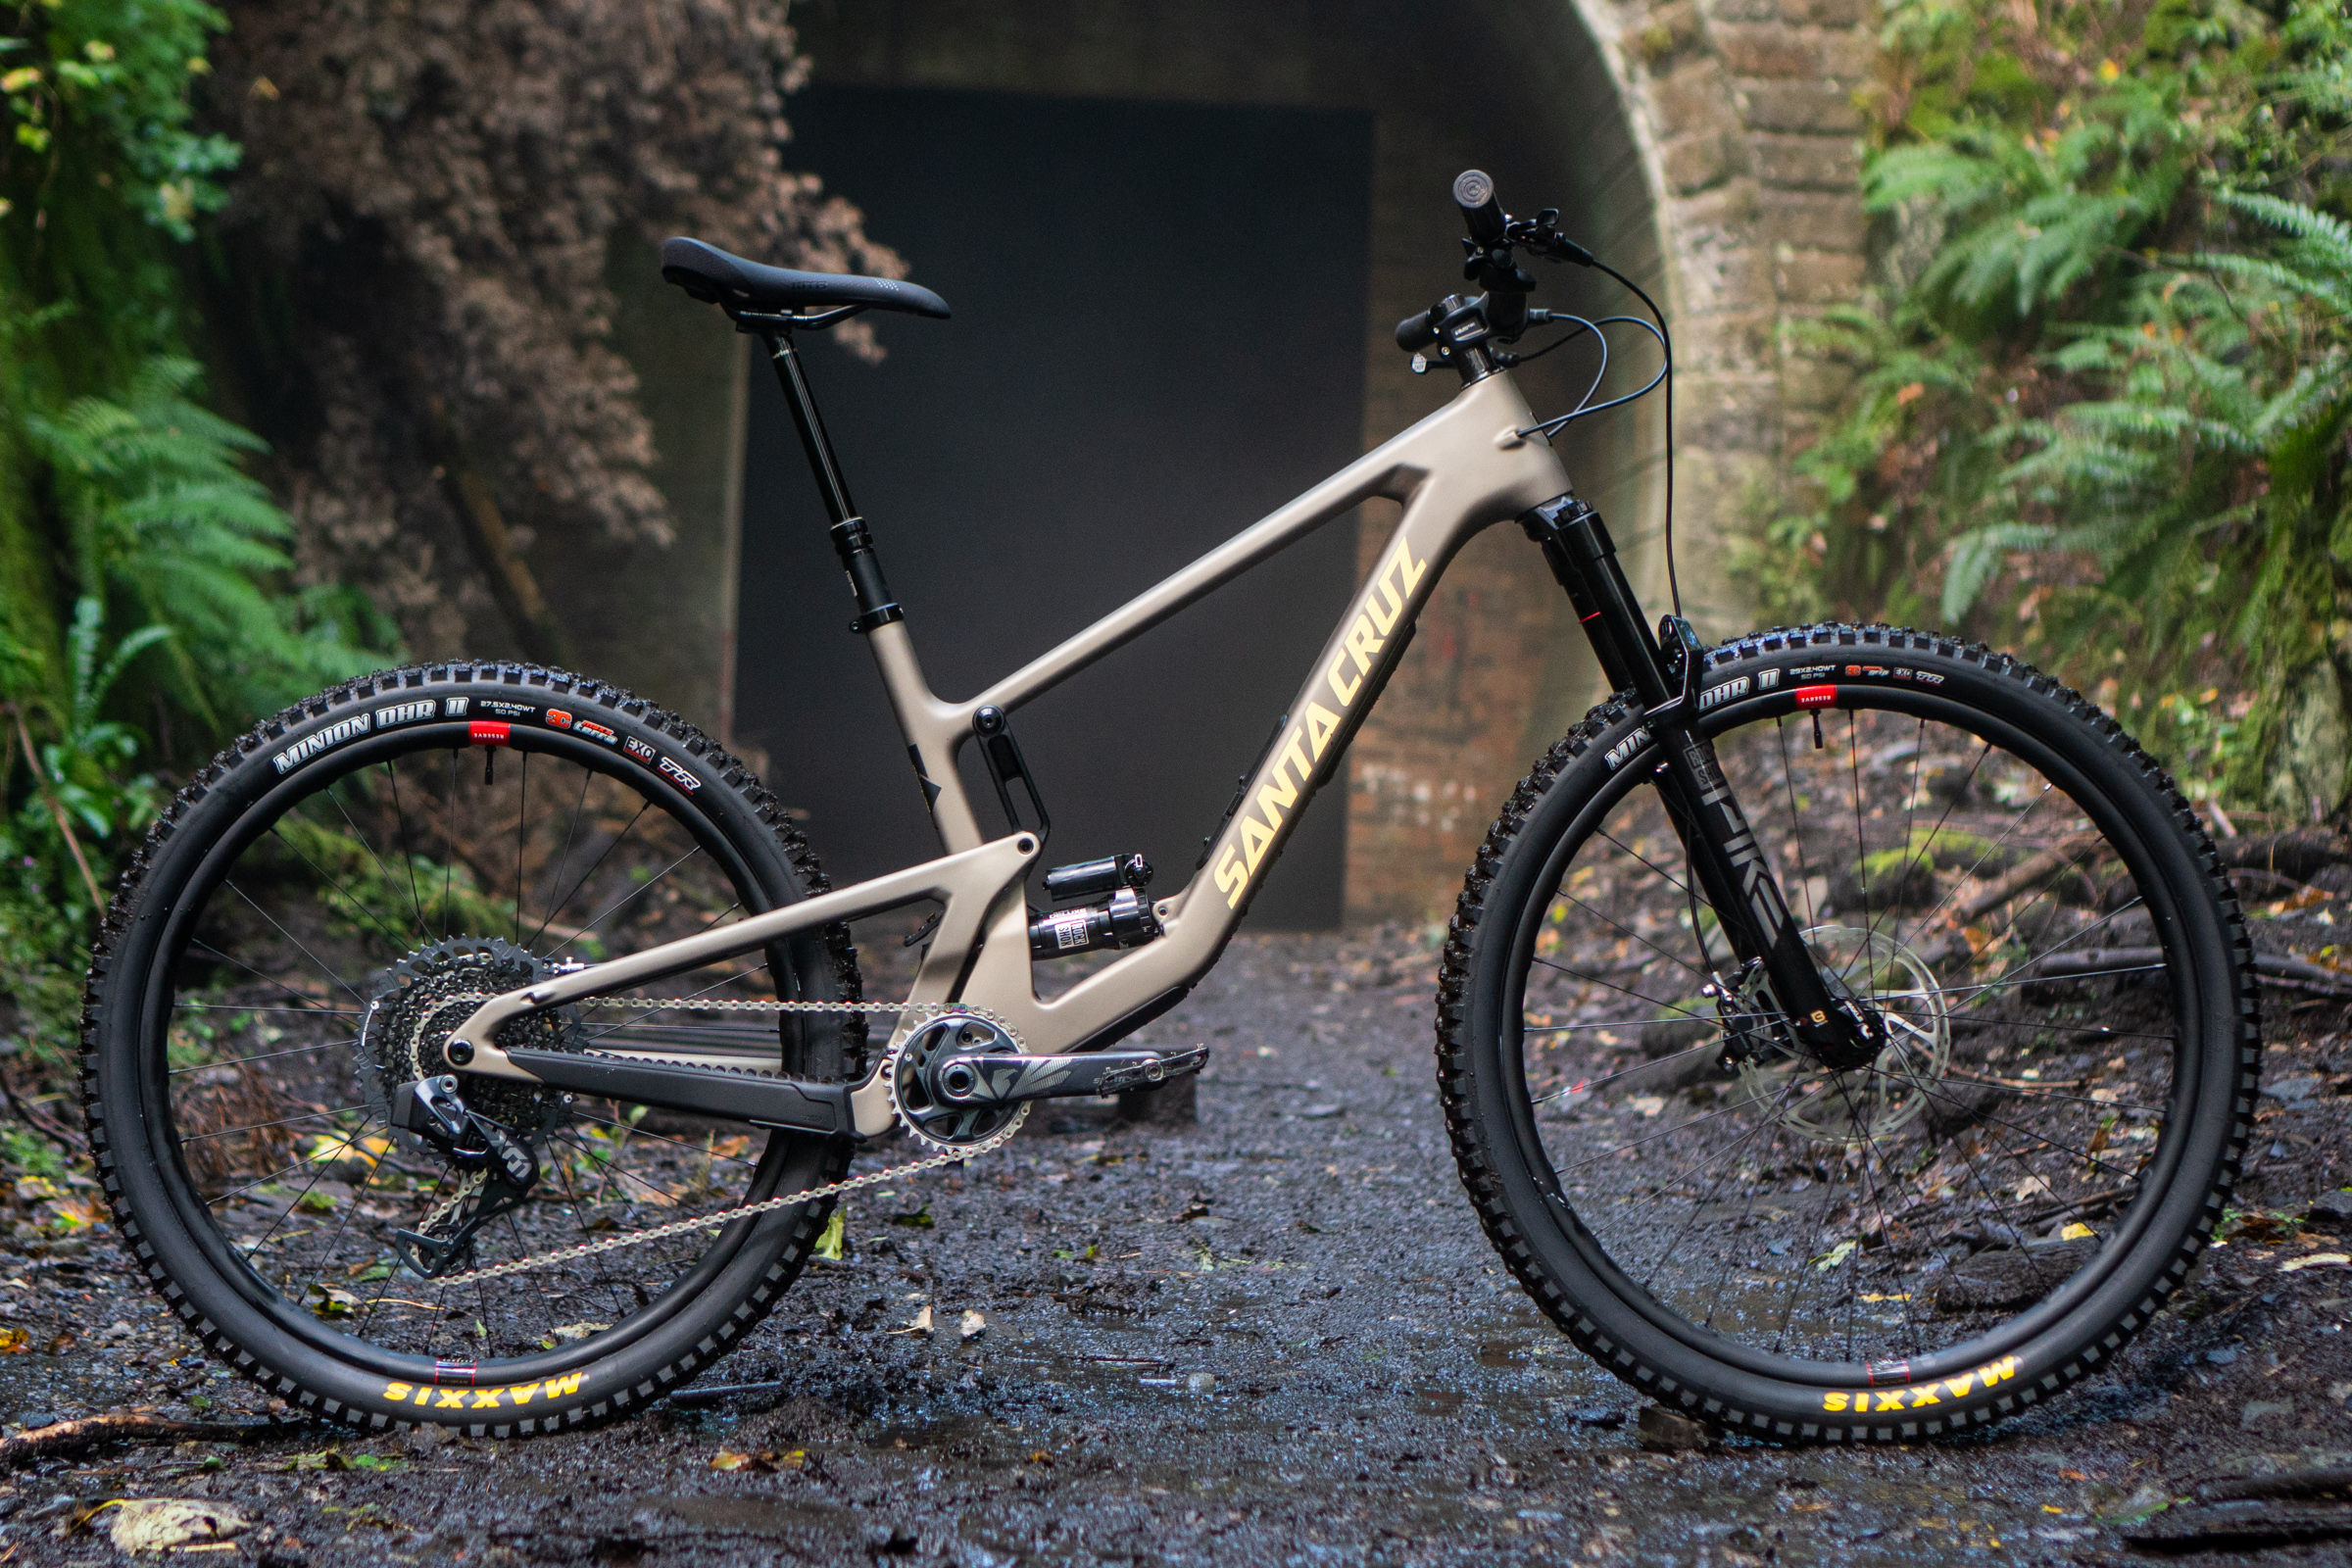 New 5010 is final 27.5in Santa Cruz bike to make switch to mullet